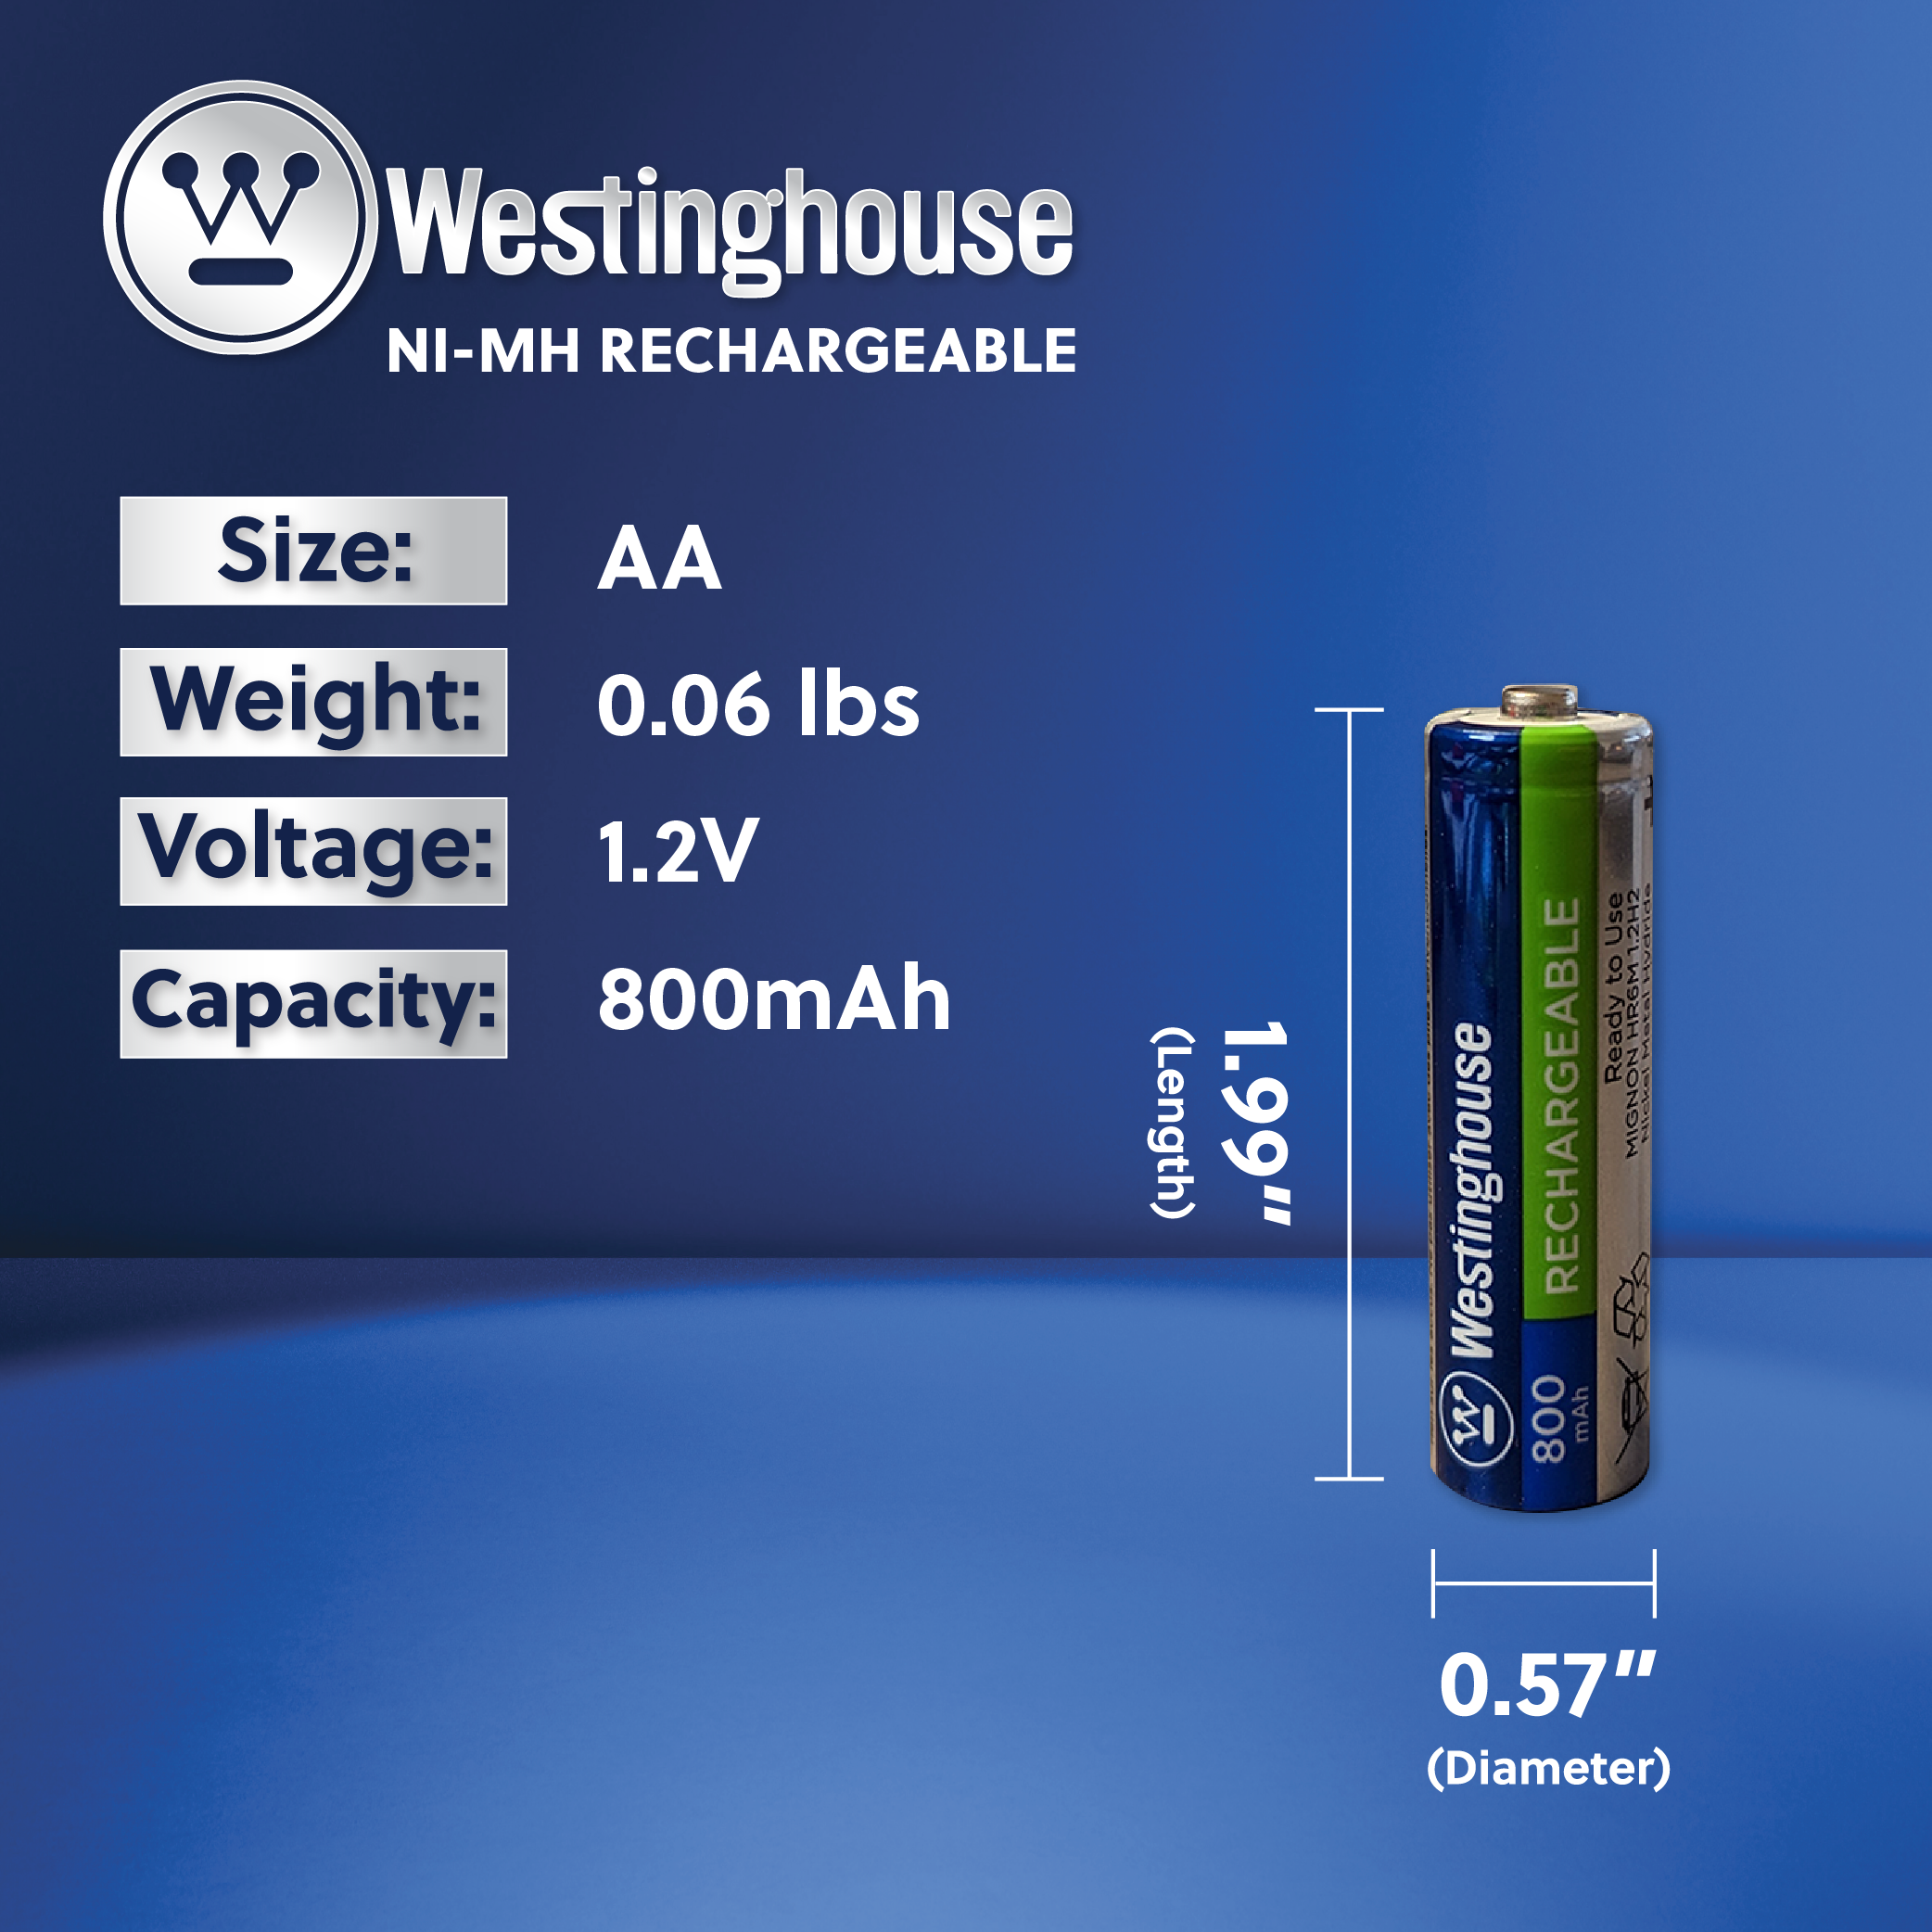 Westinghouse AA Ni-Mh Rechargeable Batteries 800 Hard Pack of 24